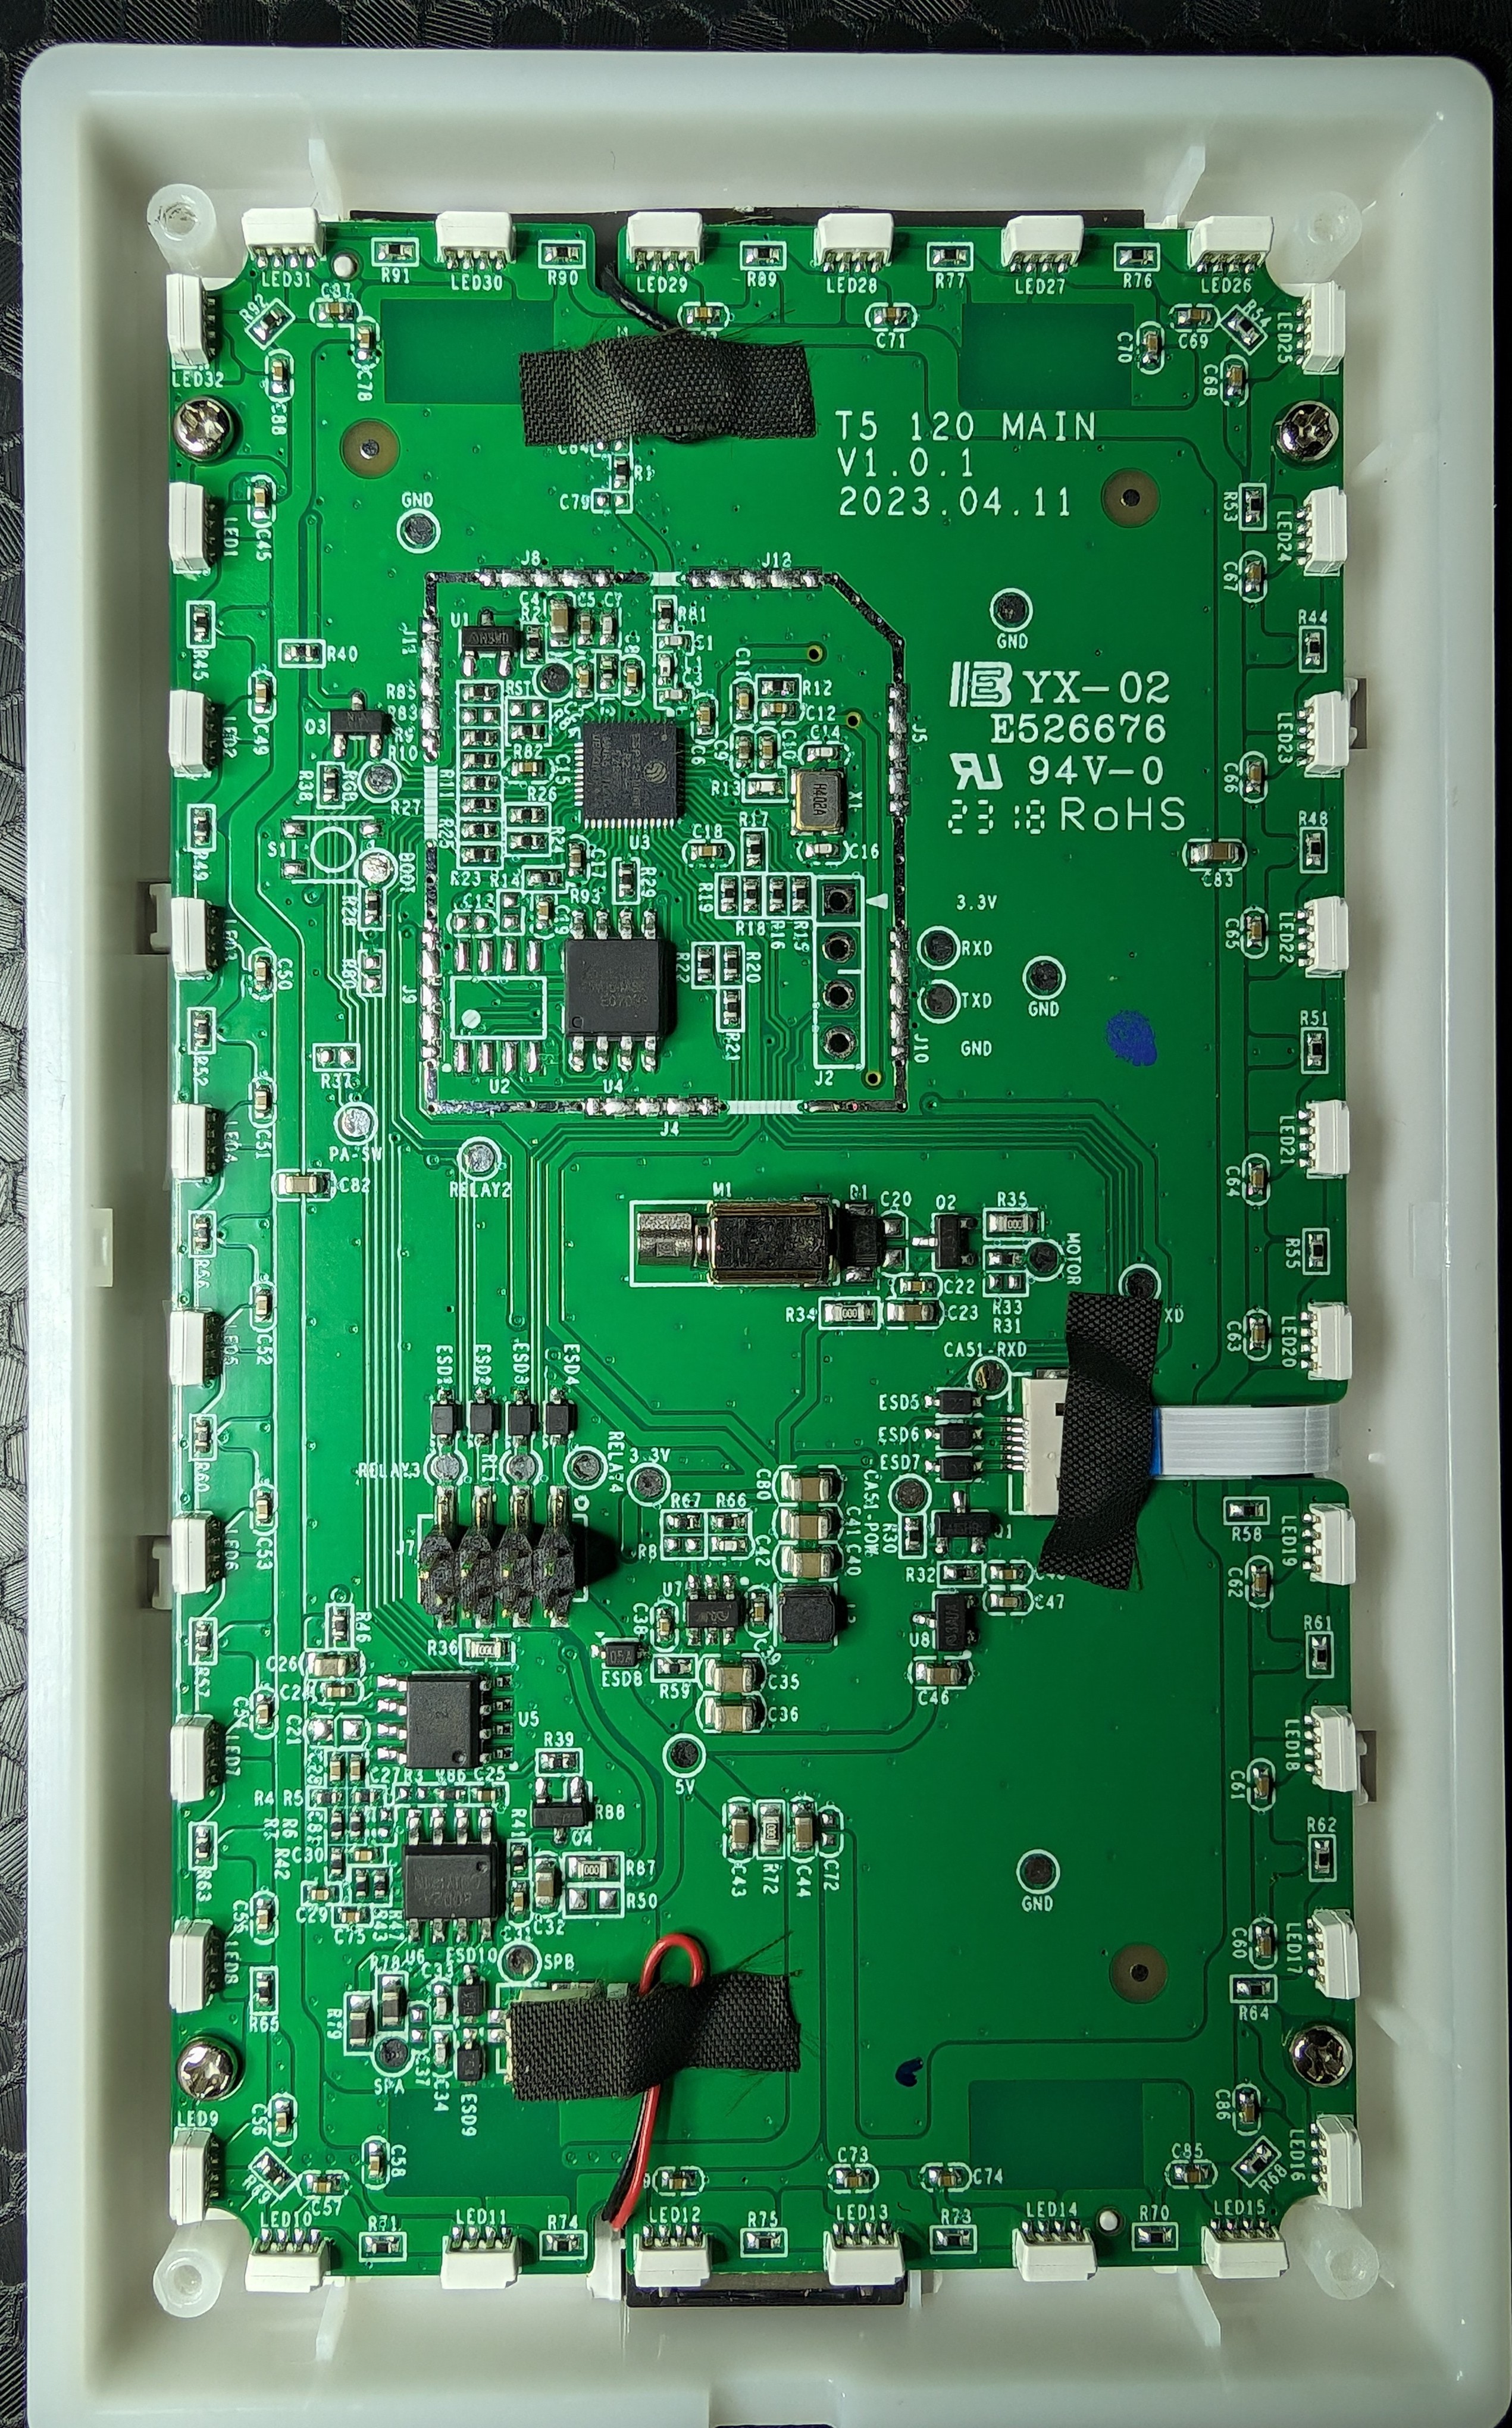 Clear shot of the PCB showing location of each LED. This is from the rear so the numbers on the right will be on the left when looking at the front of the switch.